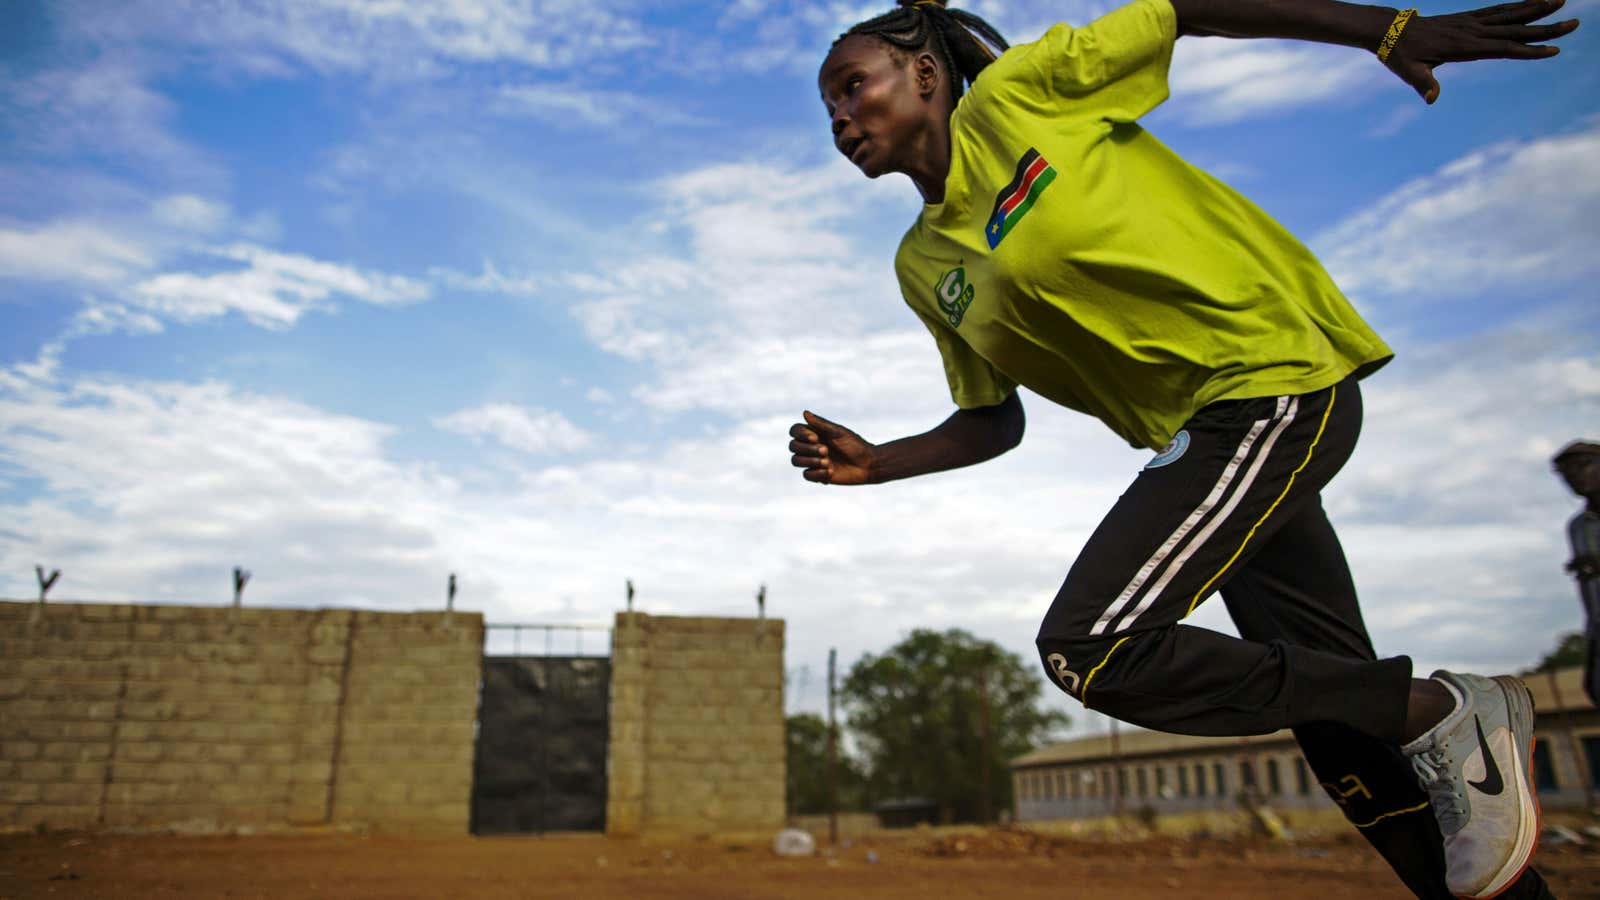 Margret Rumat Rumar Hassan trains in Juba. Hassan will represent South Sudan in its first-ever Olympics delegation.